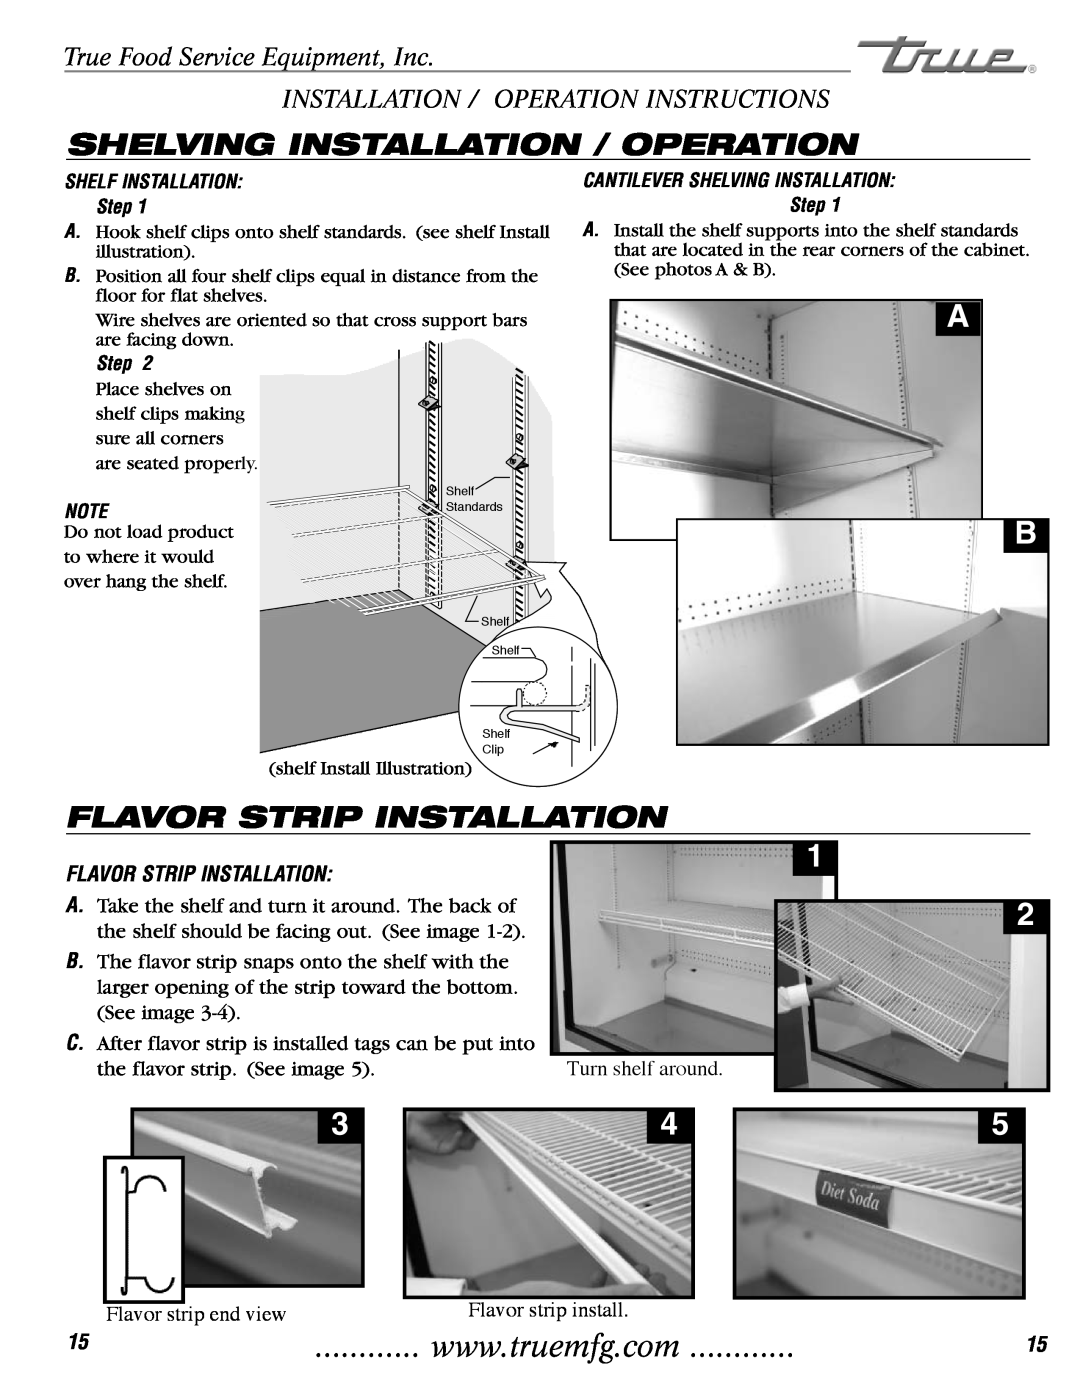 True Manufacturing Company TAC-30 Shelving Installation / Operation, Flavor Strip Installation, Flavor strip end view 